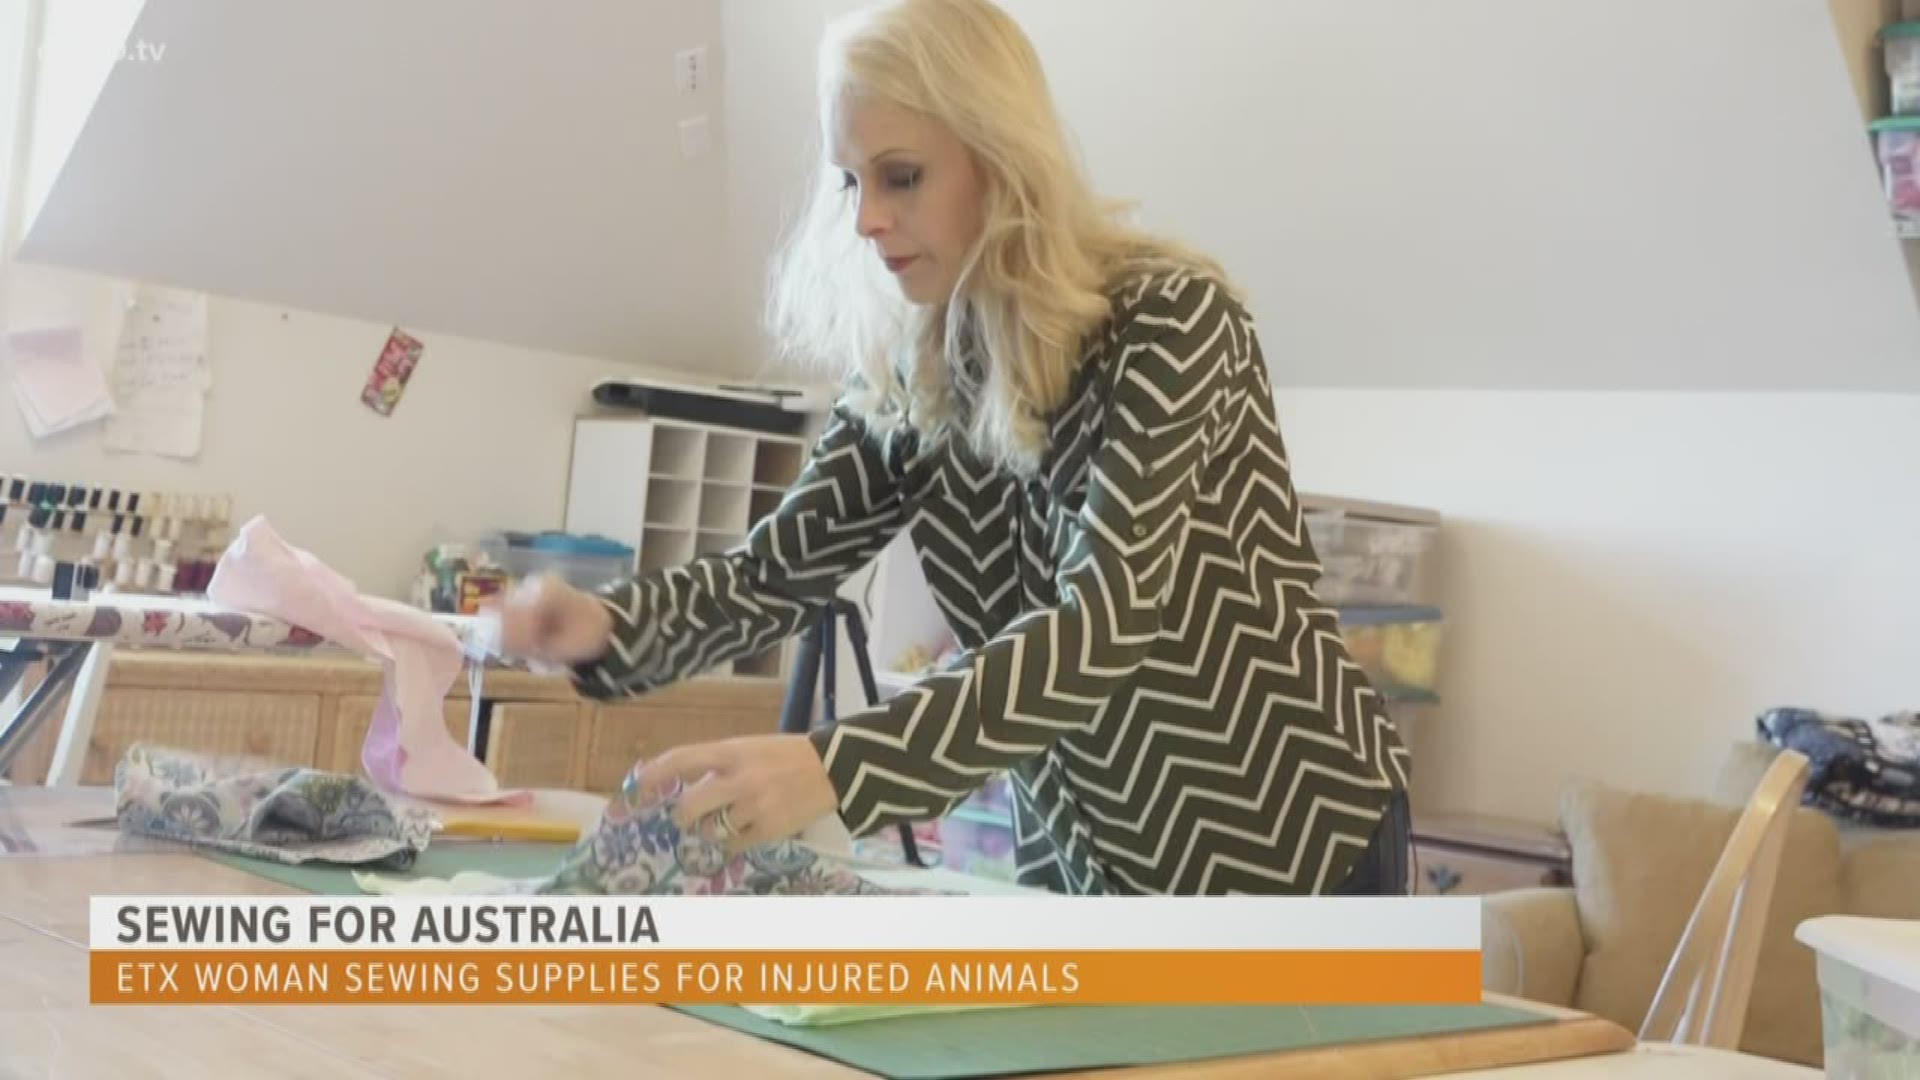 Connie Fleming from Flint is turning her passion for sewing into a resource to help injured Australian animals.